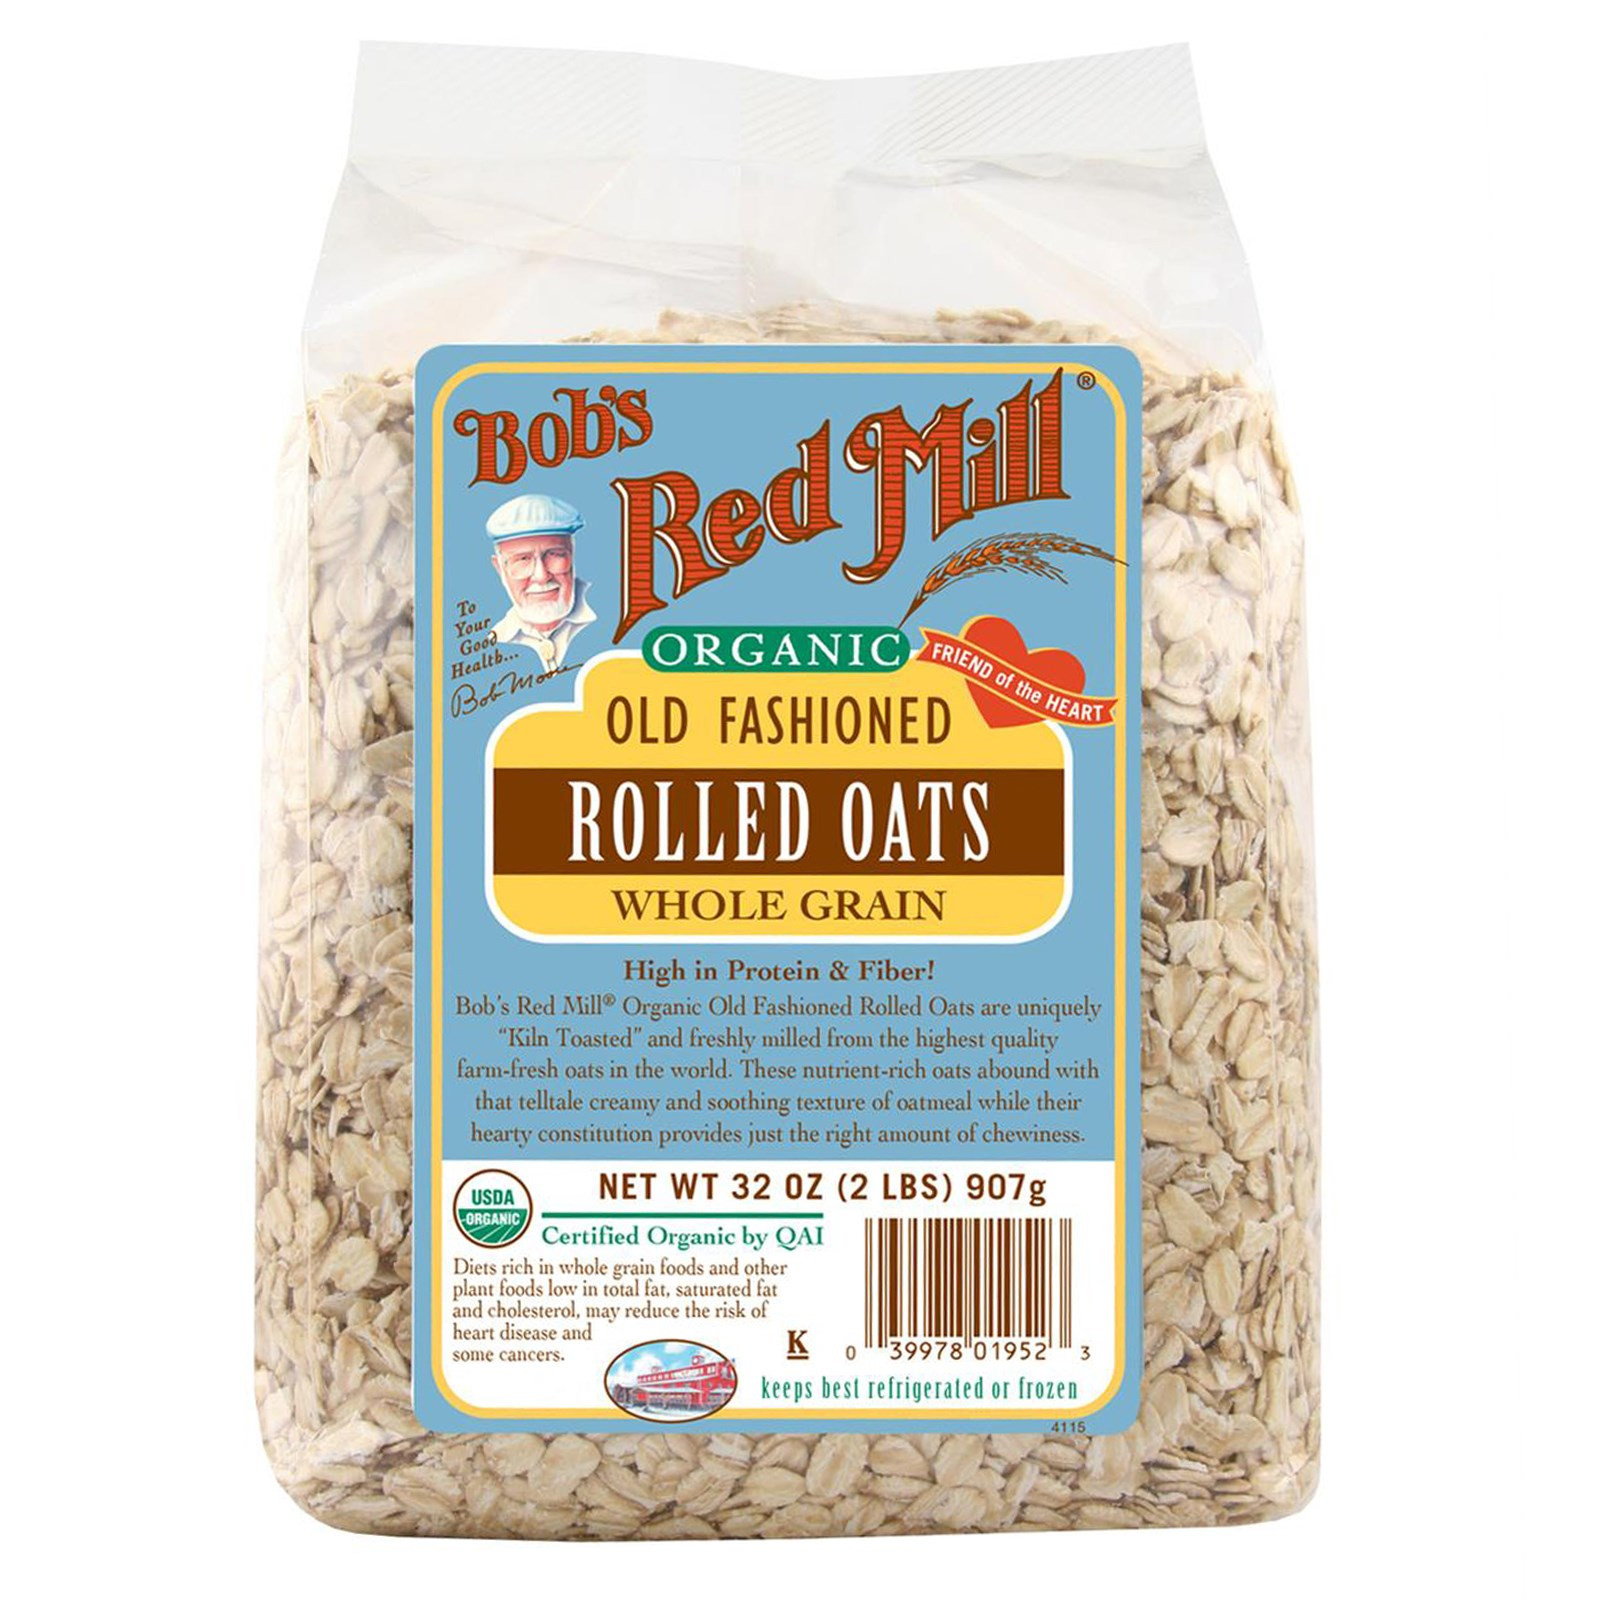 Are whole Grain Rolled Oats Gluten Free Inspirational Gluten Free whole Grain Rolled Oats Bobs Red Mill 32oz